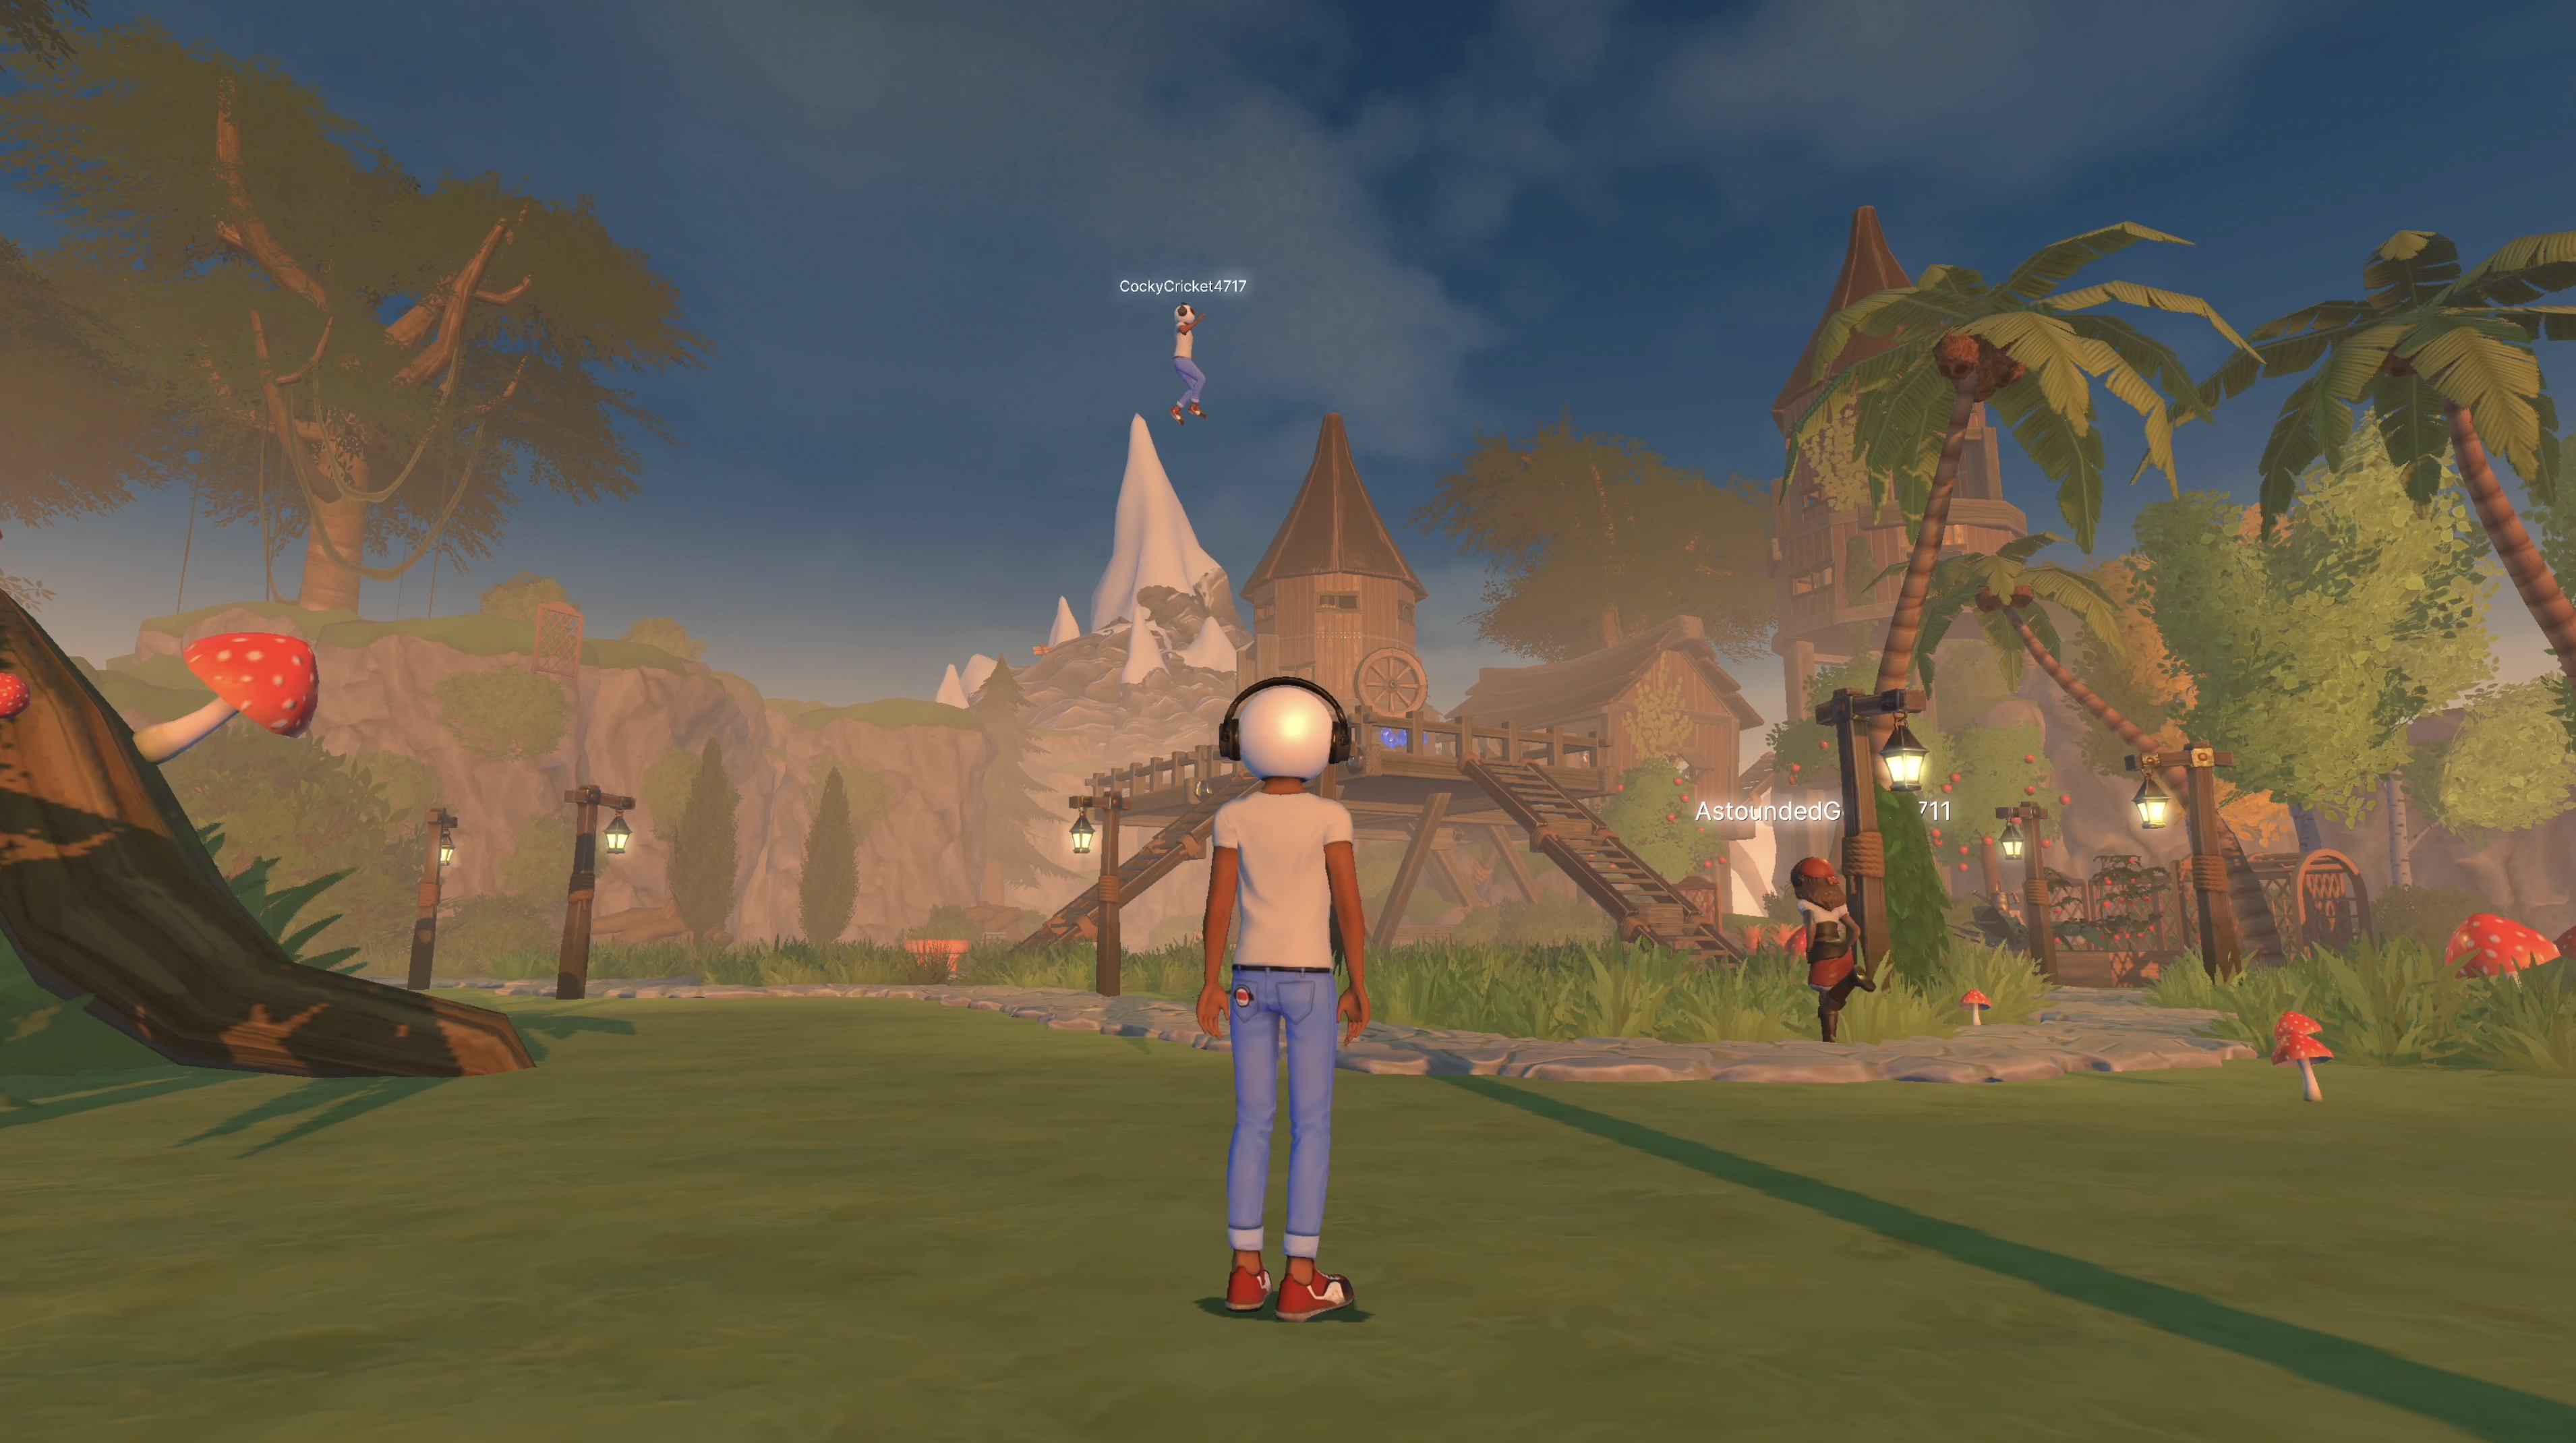 Tower of obby helll - HiberWorld: Play, Create and Share in the Metaverse.